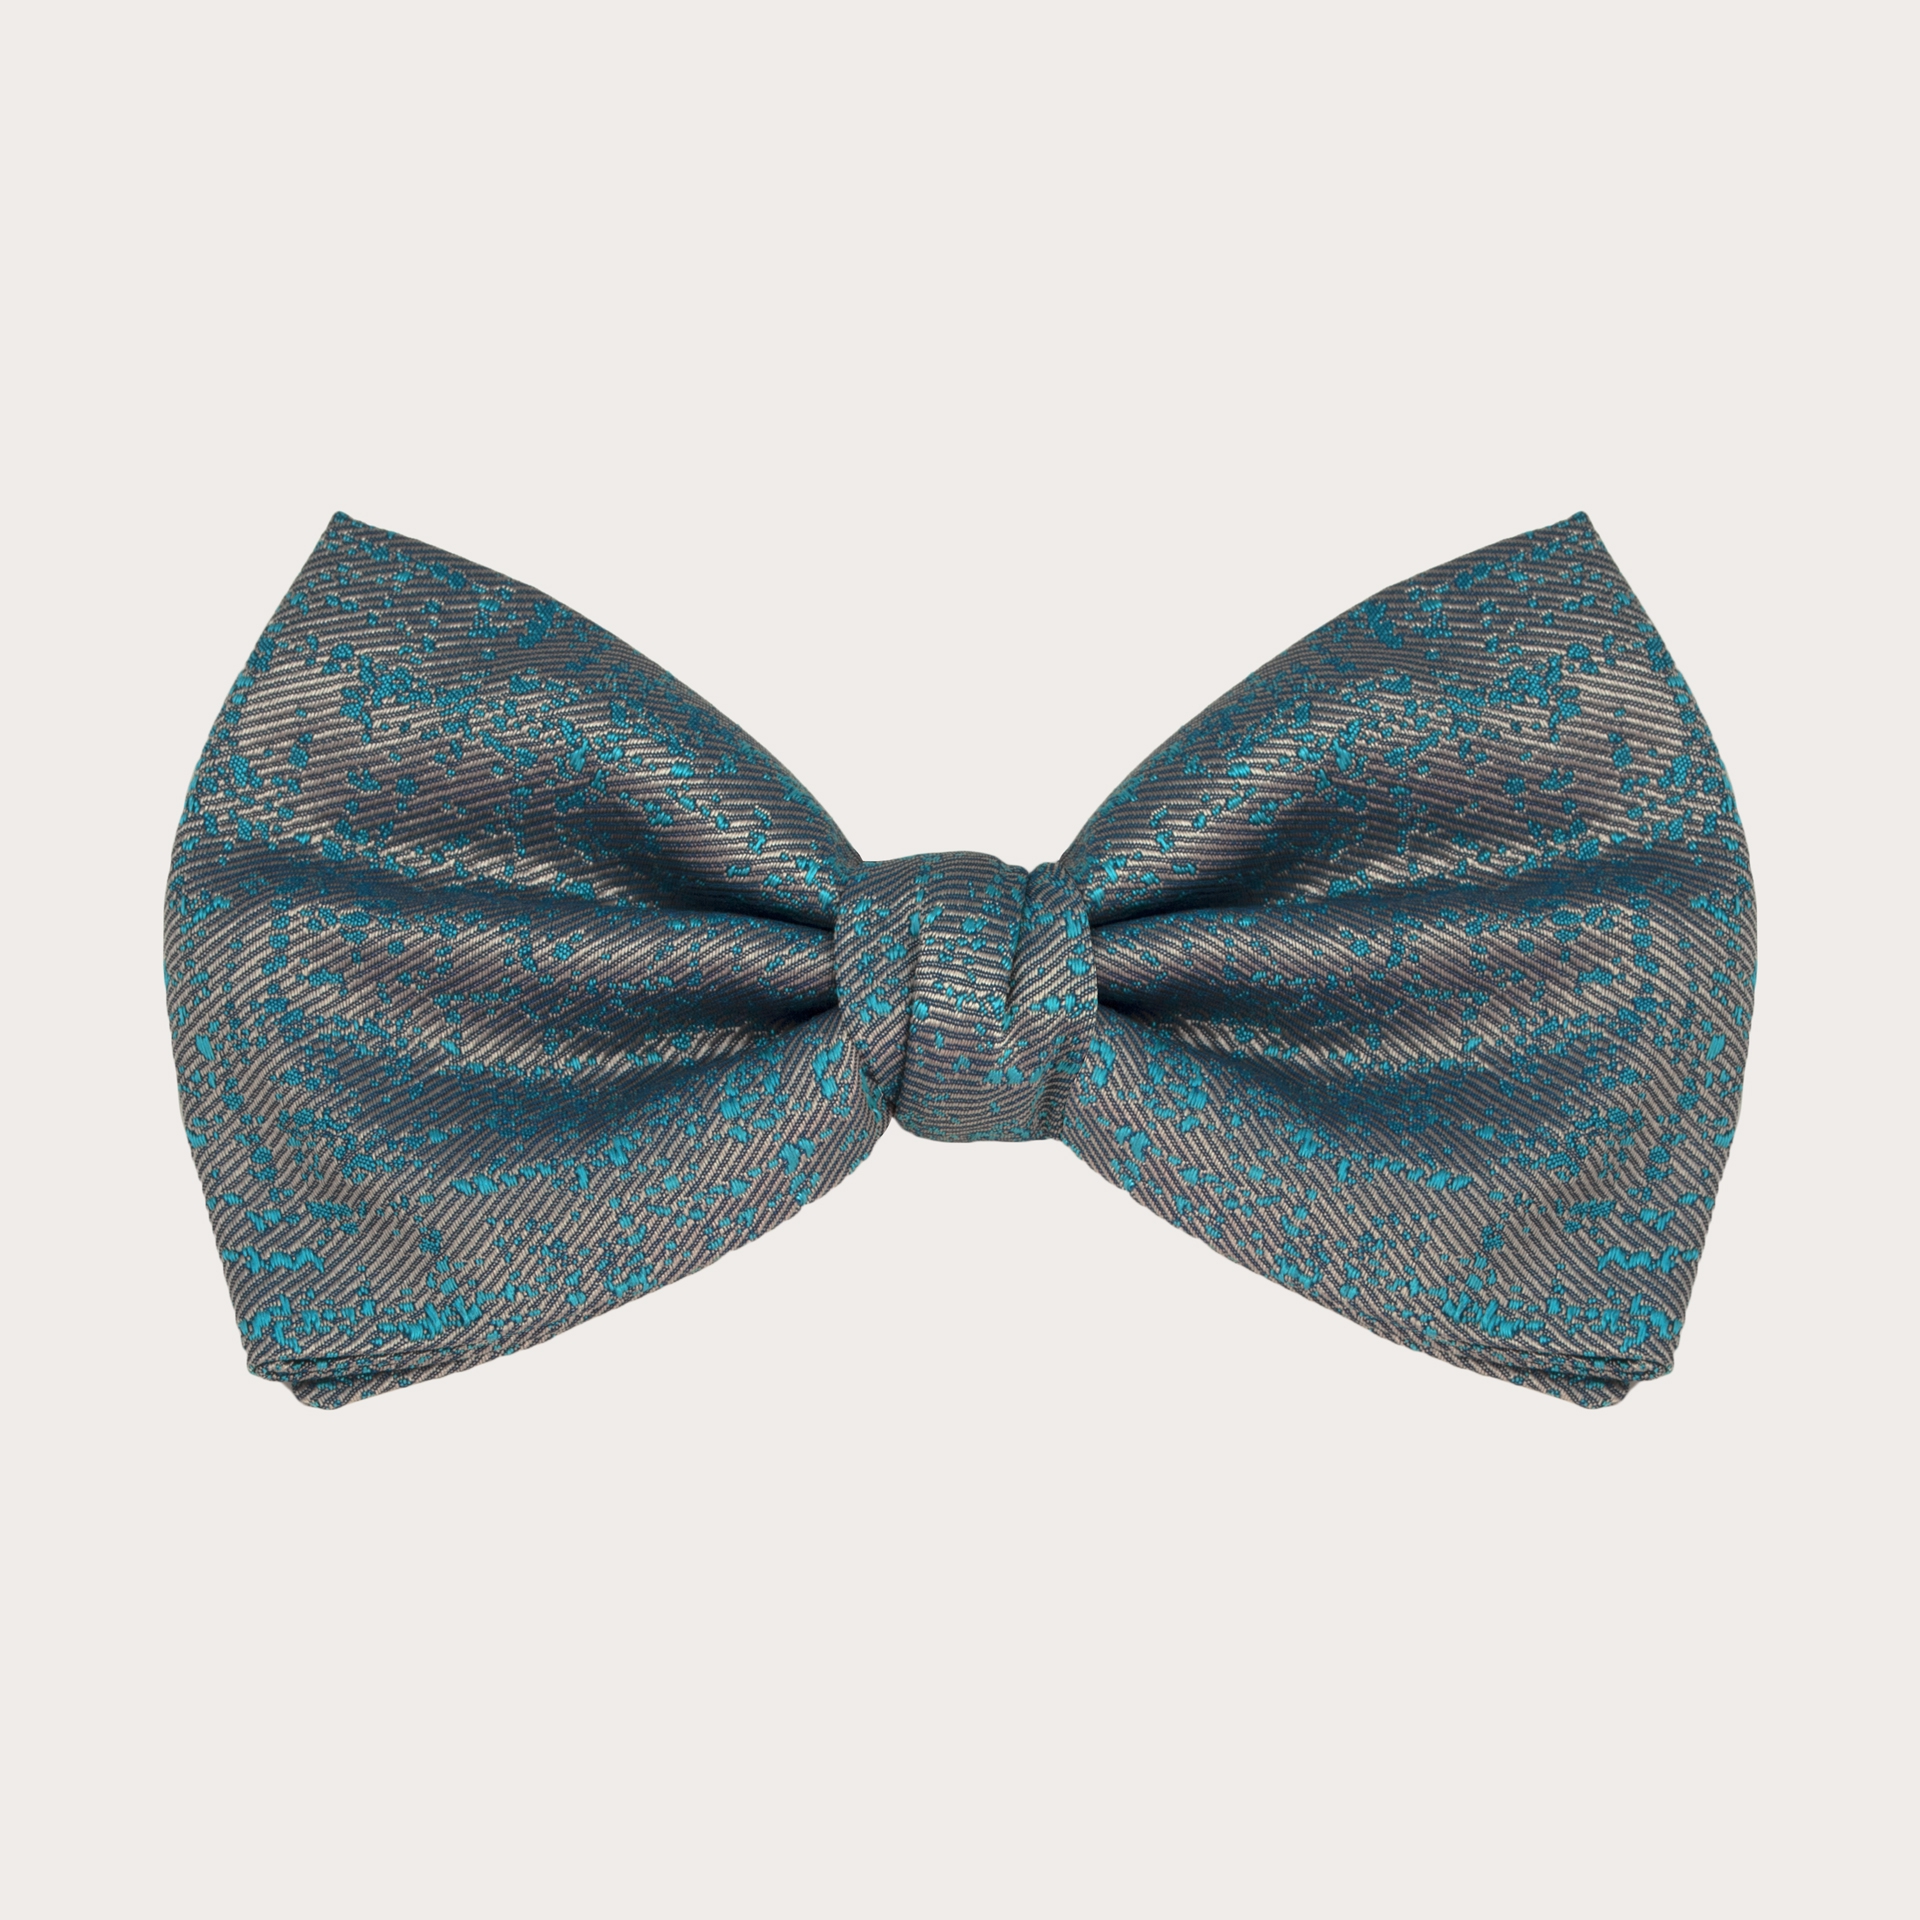 BRUCLE Ceremony bow tie in jacquard silk, silver and petrol